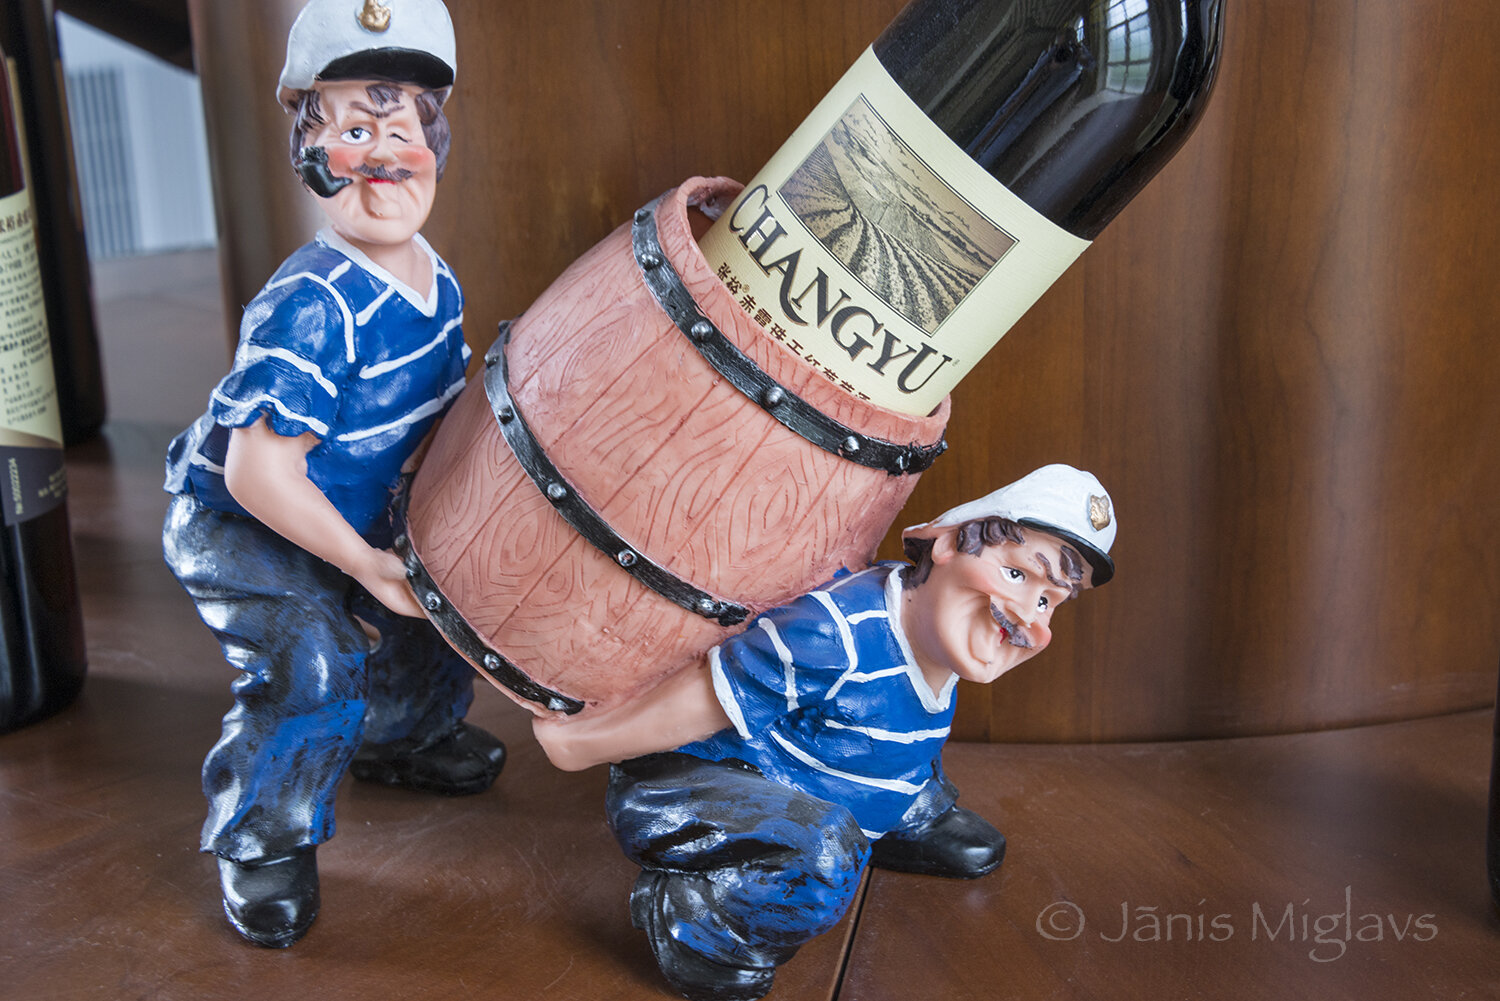 Humorous wine bottle holder in Chateau Changyu Moser winery gift shop.